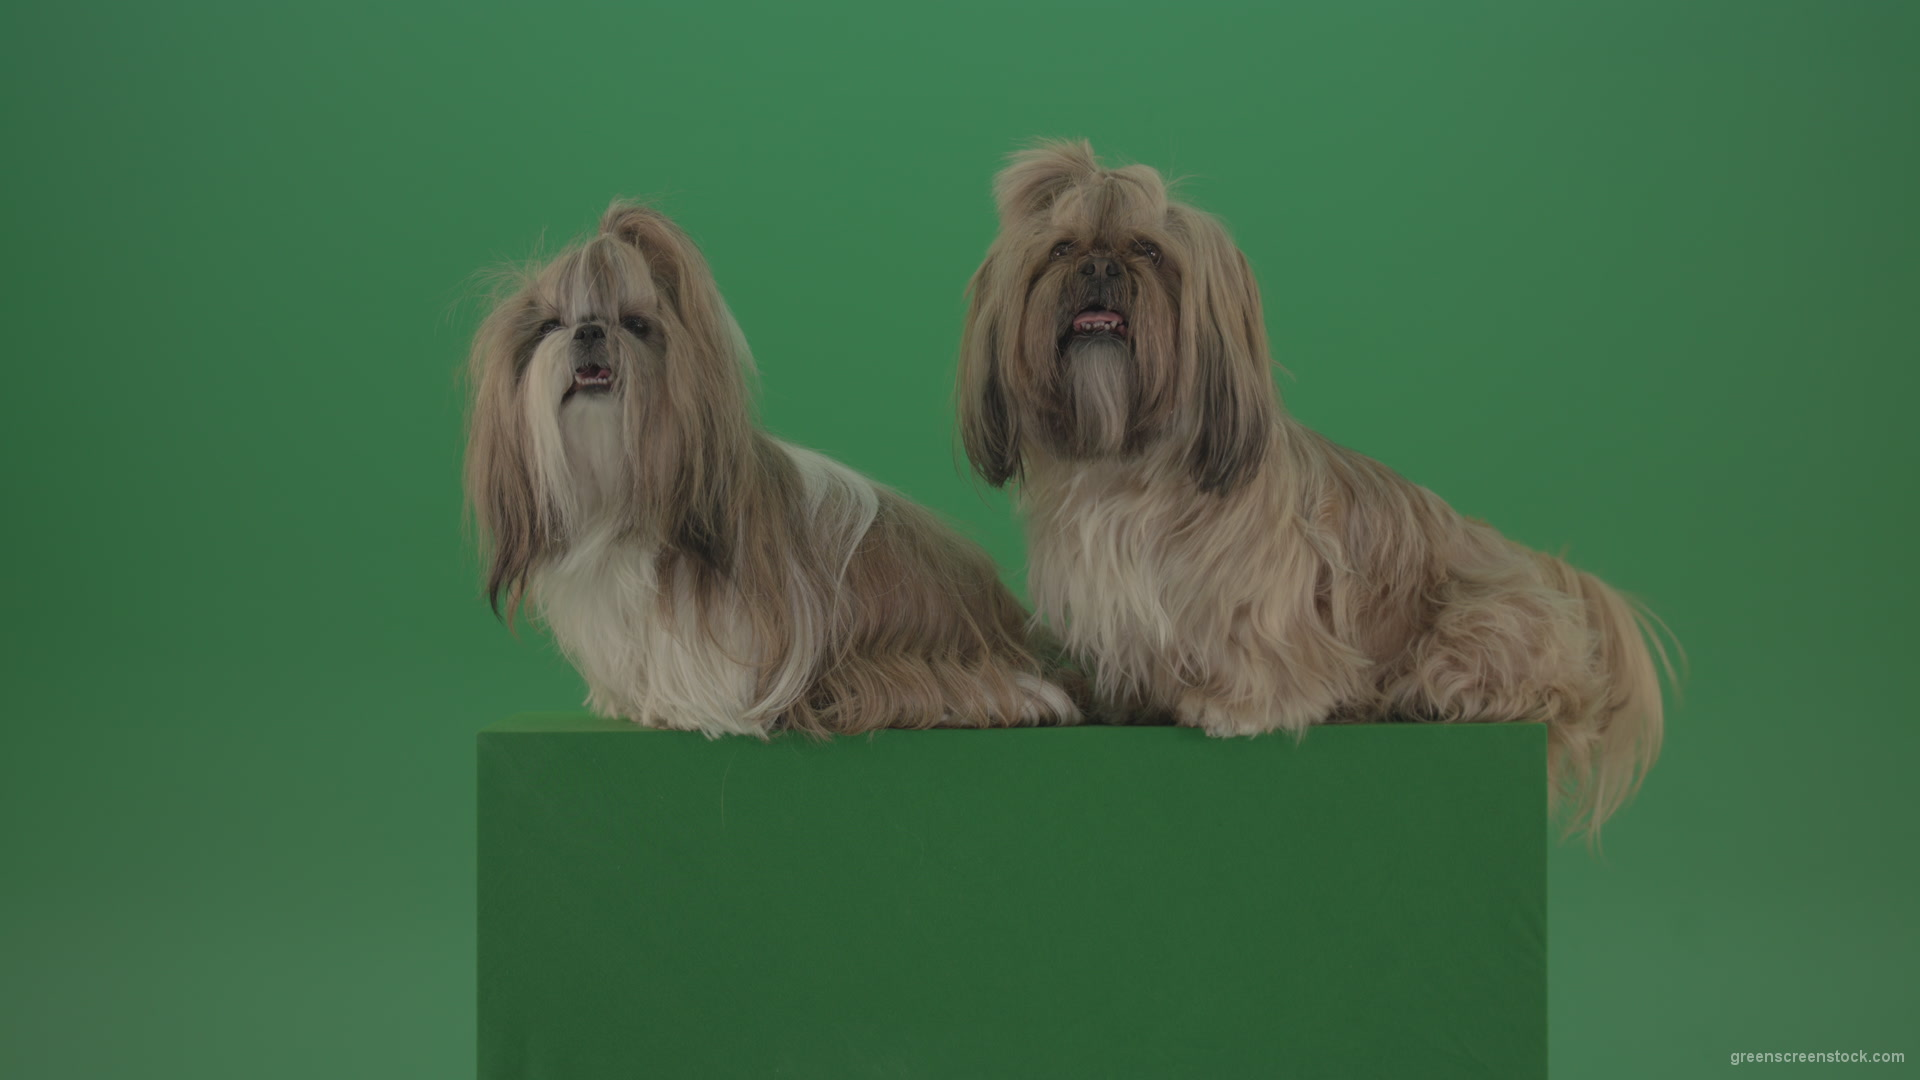 vj video background Awards-winners-Shih-tzu-fashion-luxury-expensive-dog-in-side-view-isolated-on-green-screen_003